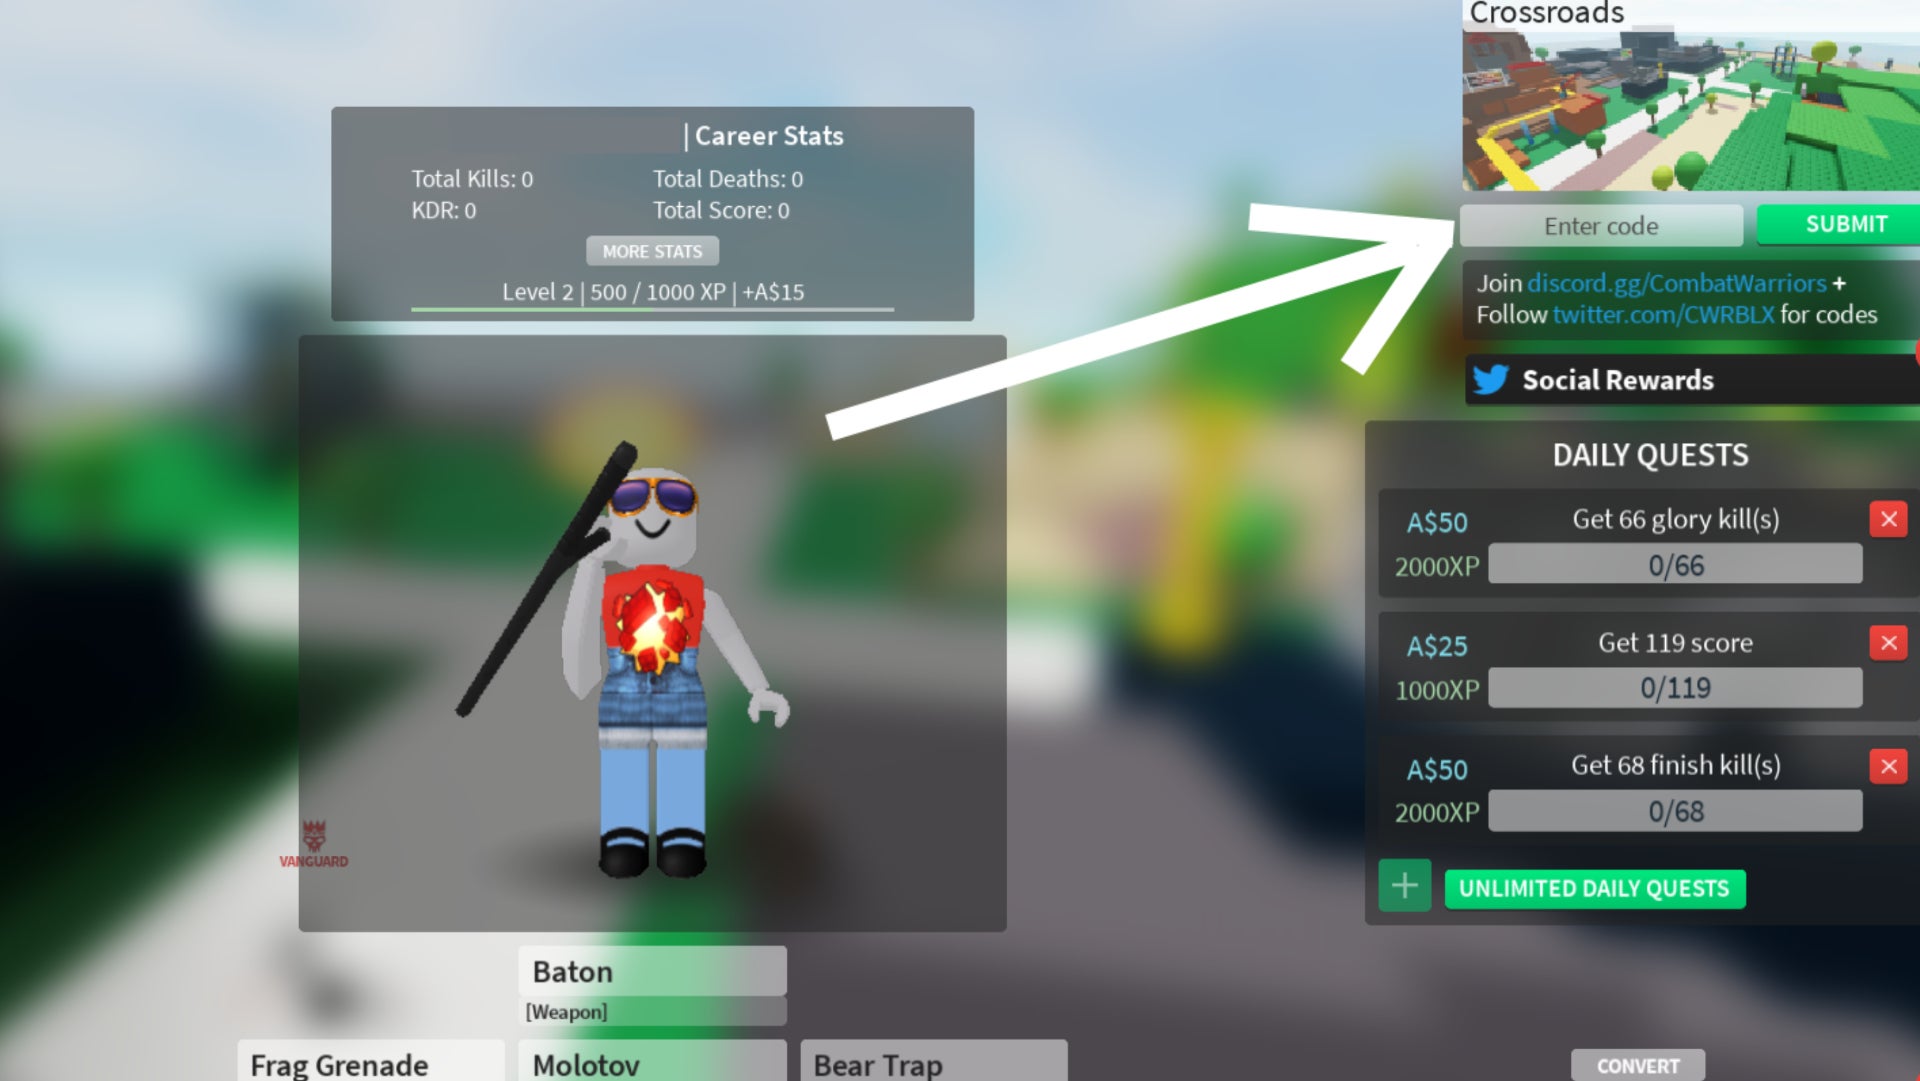 Roblox Combat Warriors code redemption menu, a white arrow is pointing to the code redemption box in the top right-hand corner.